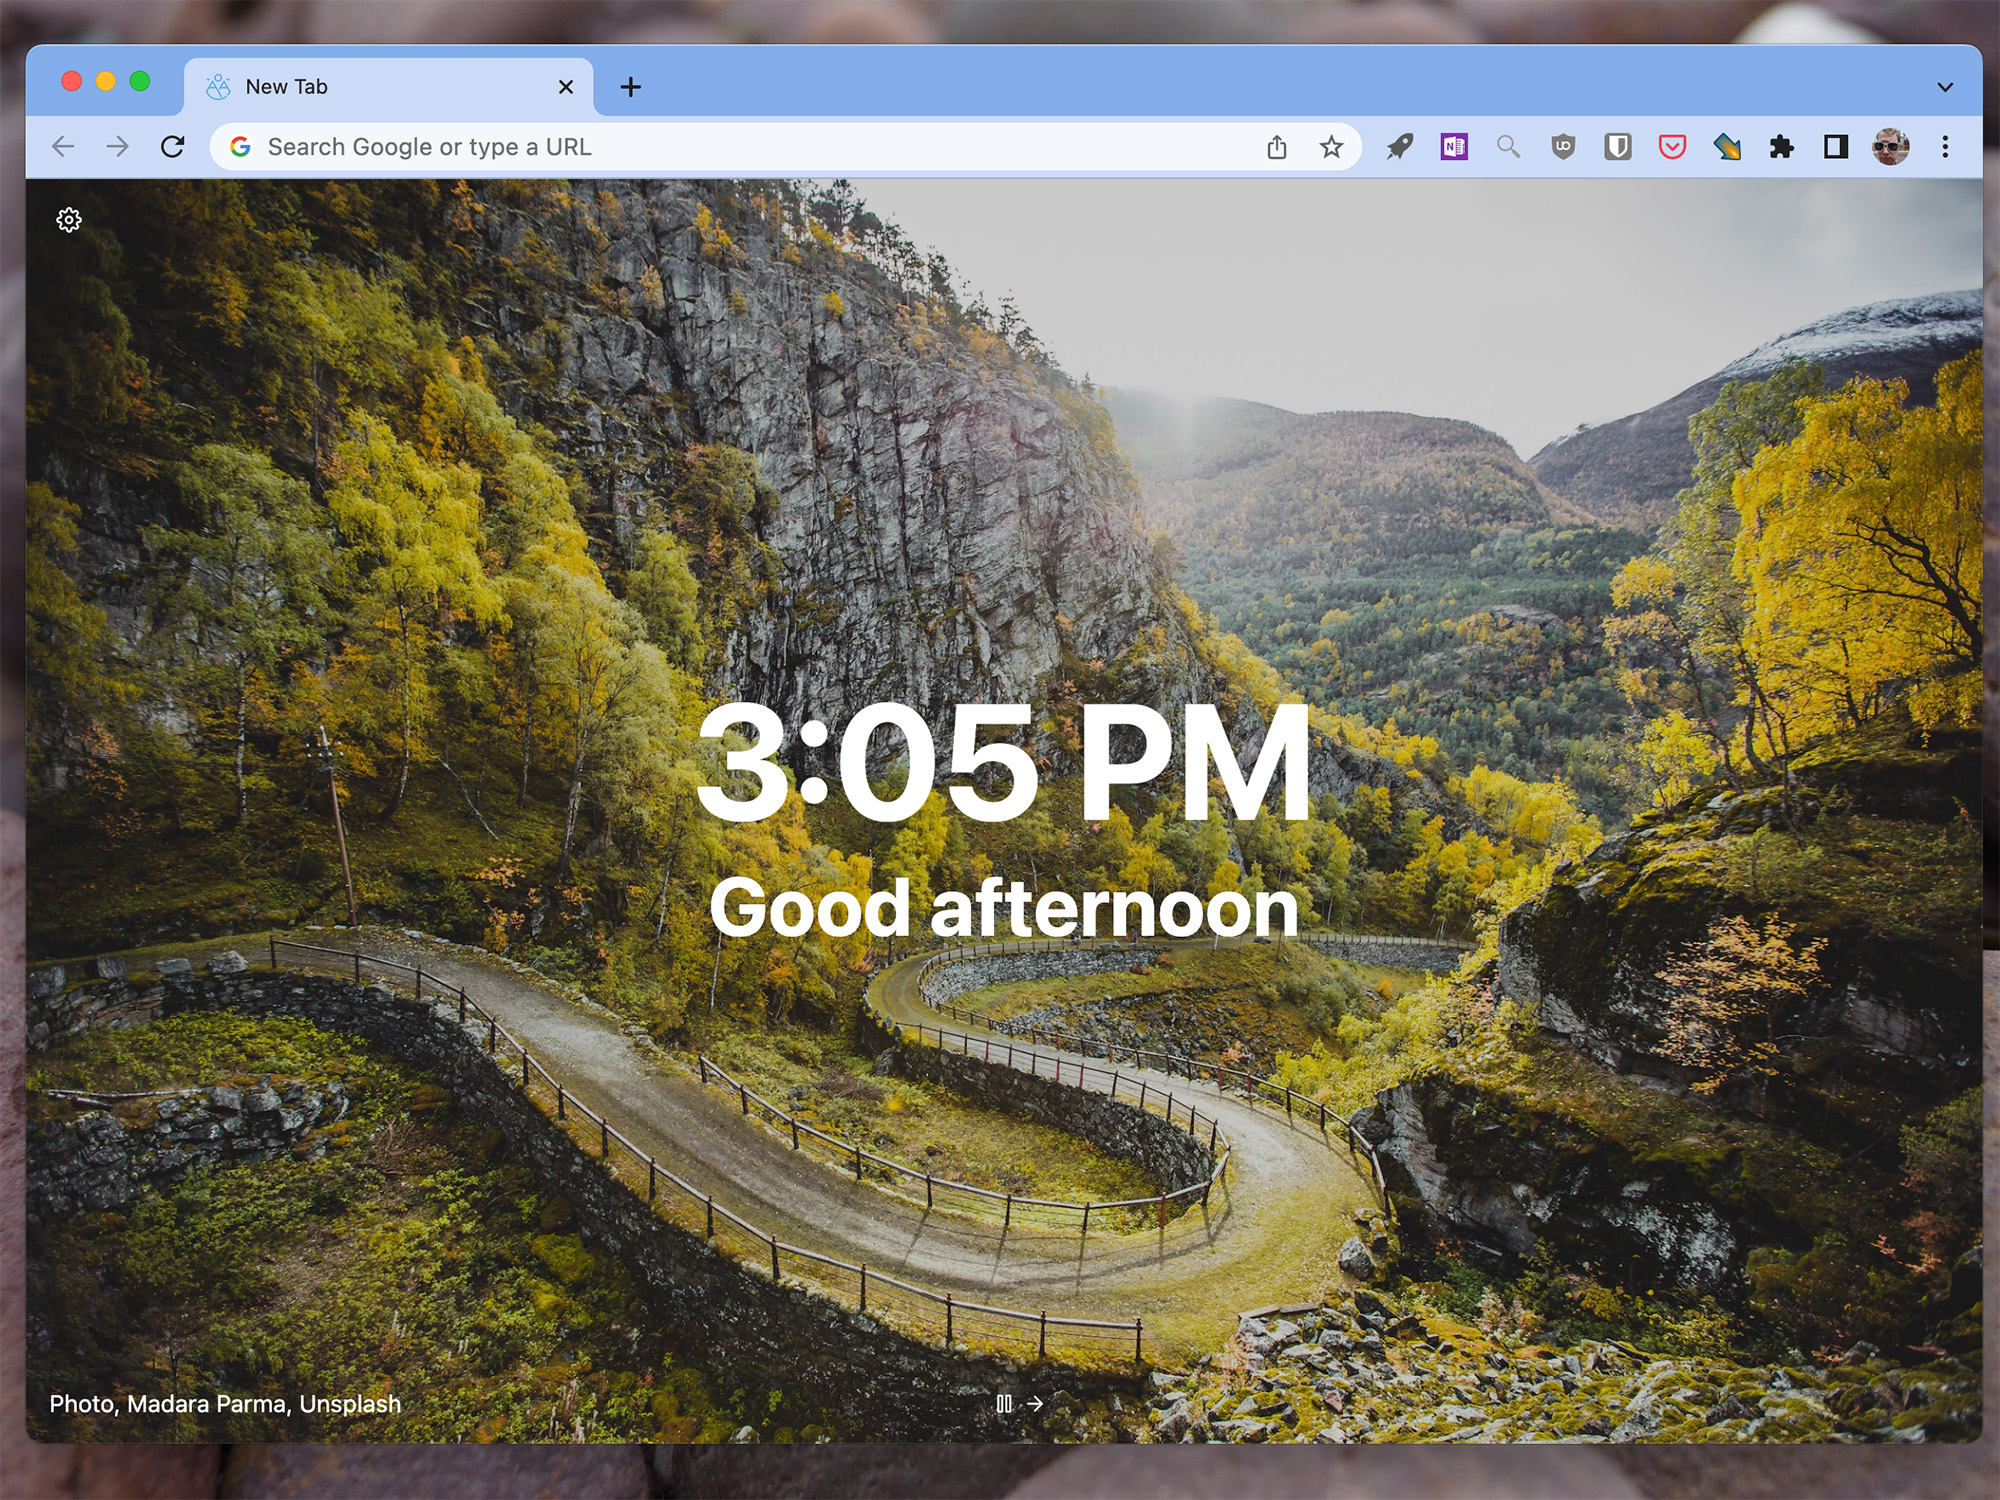 How to change Chrome's new tab page